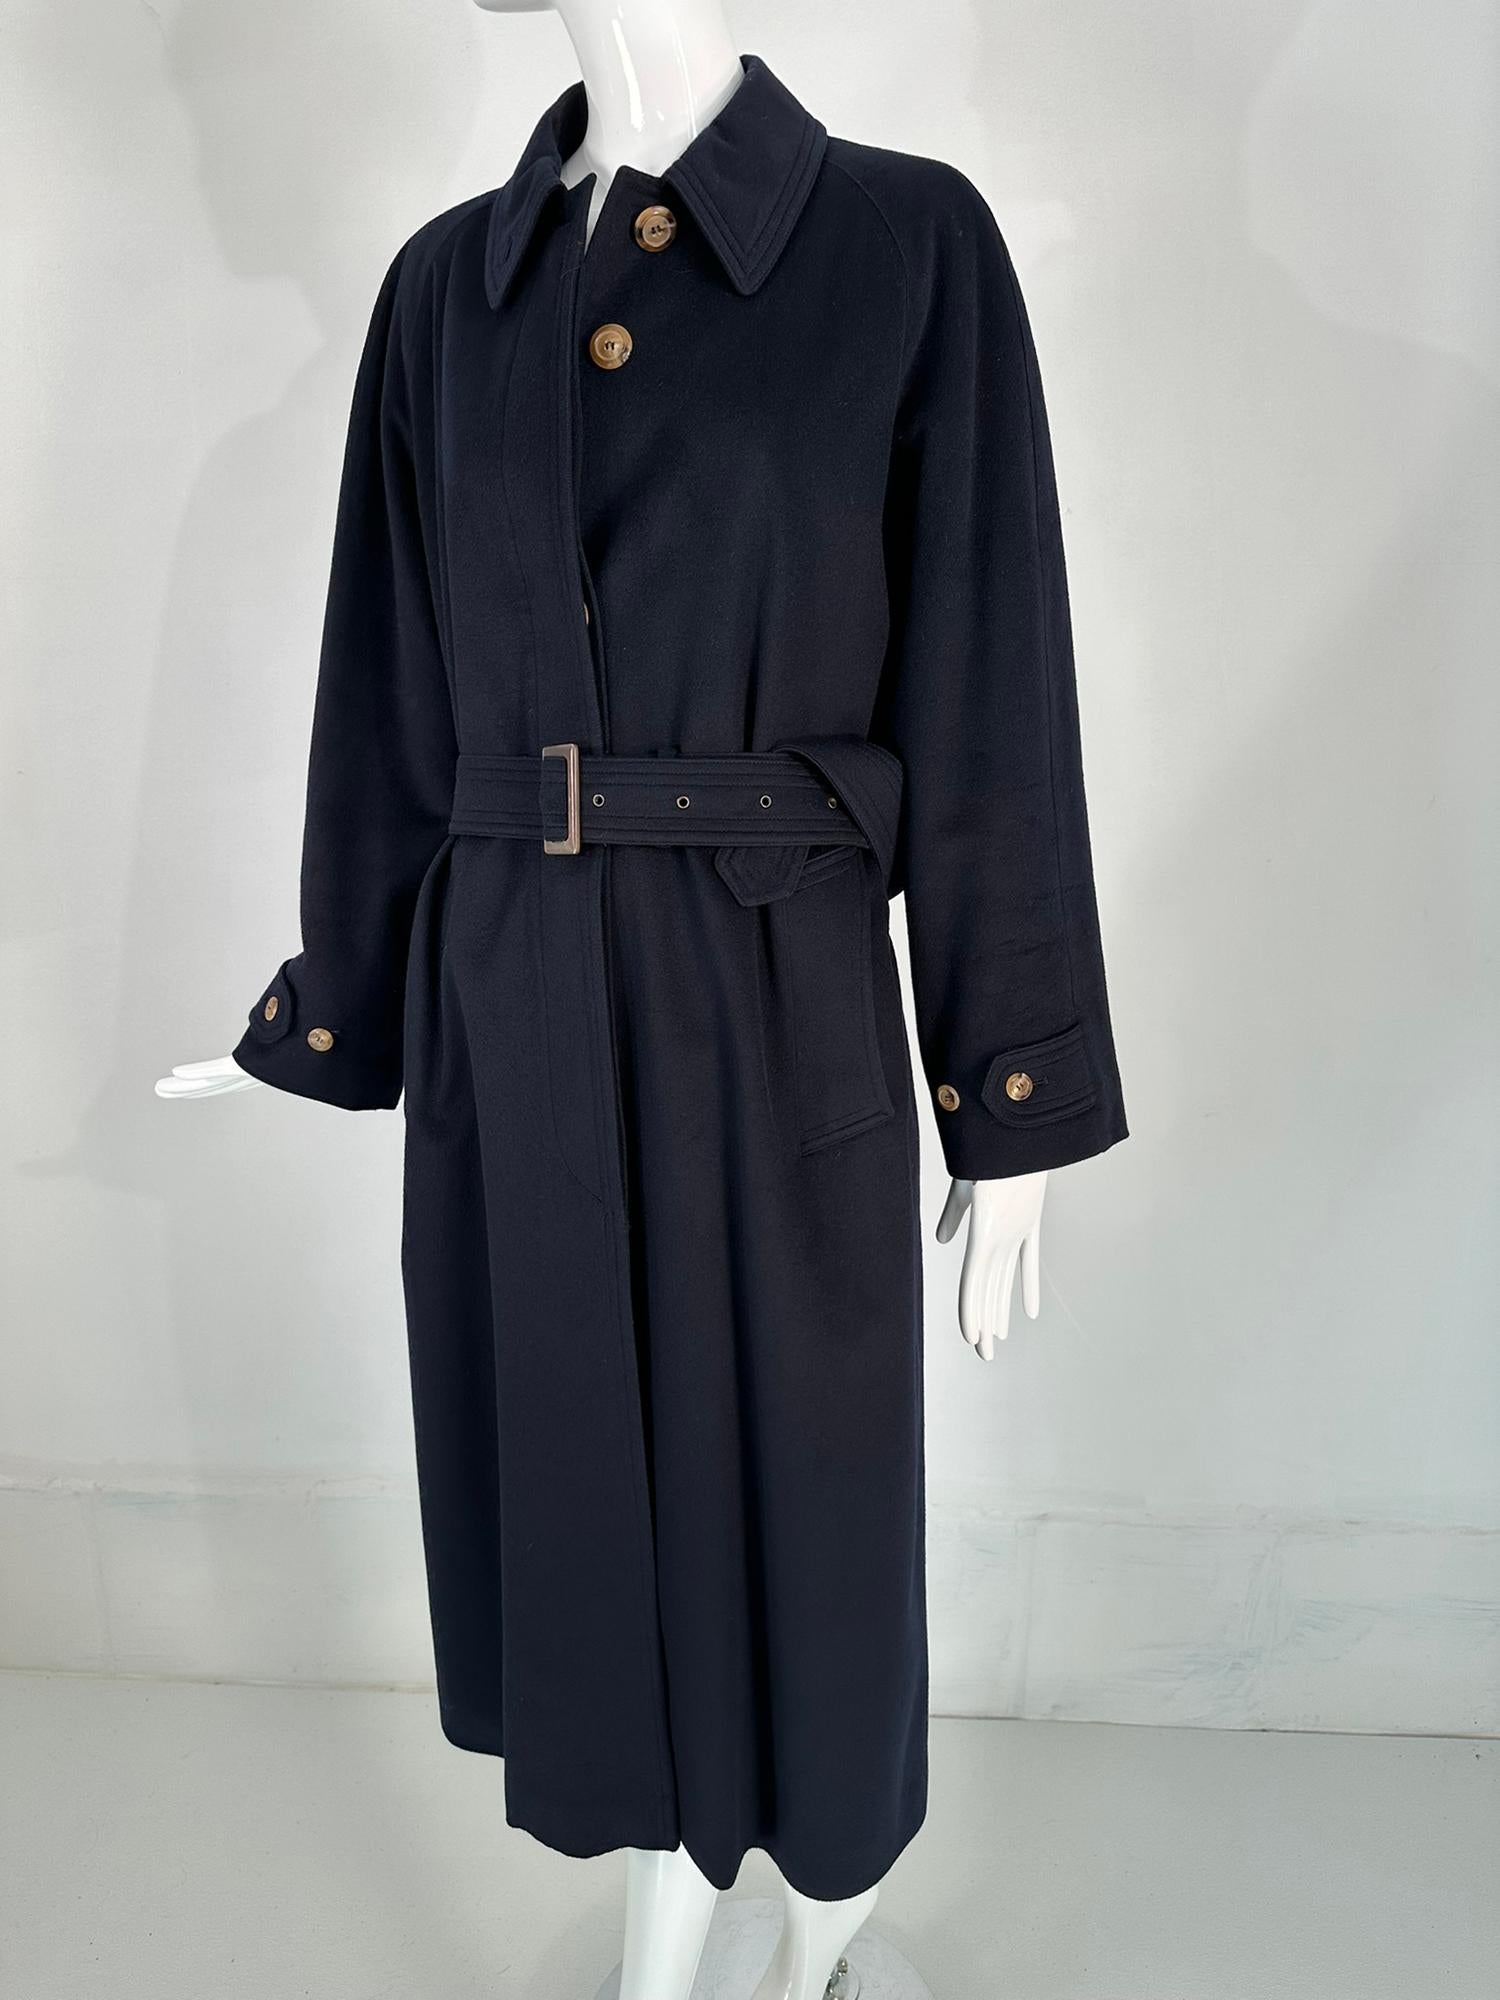 Giorgio Armani Classico Navy Blue Cashmere Raglan Sleeve Belted Over Coat  For Sale 8